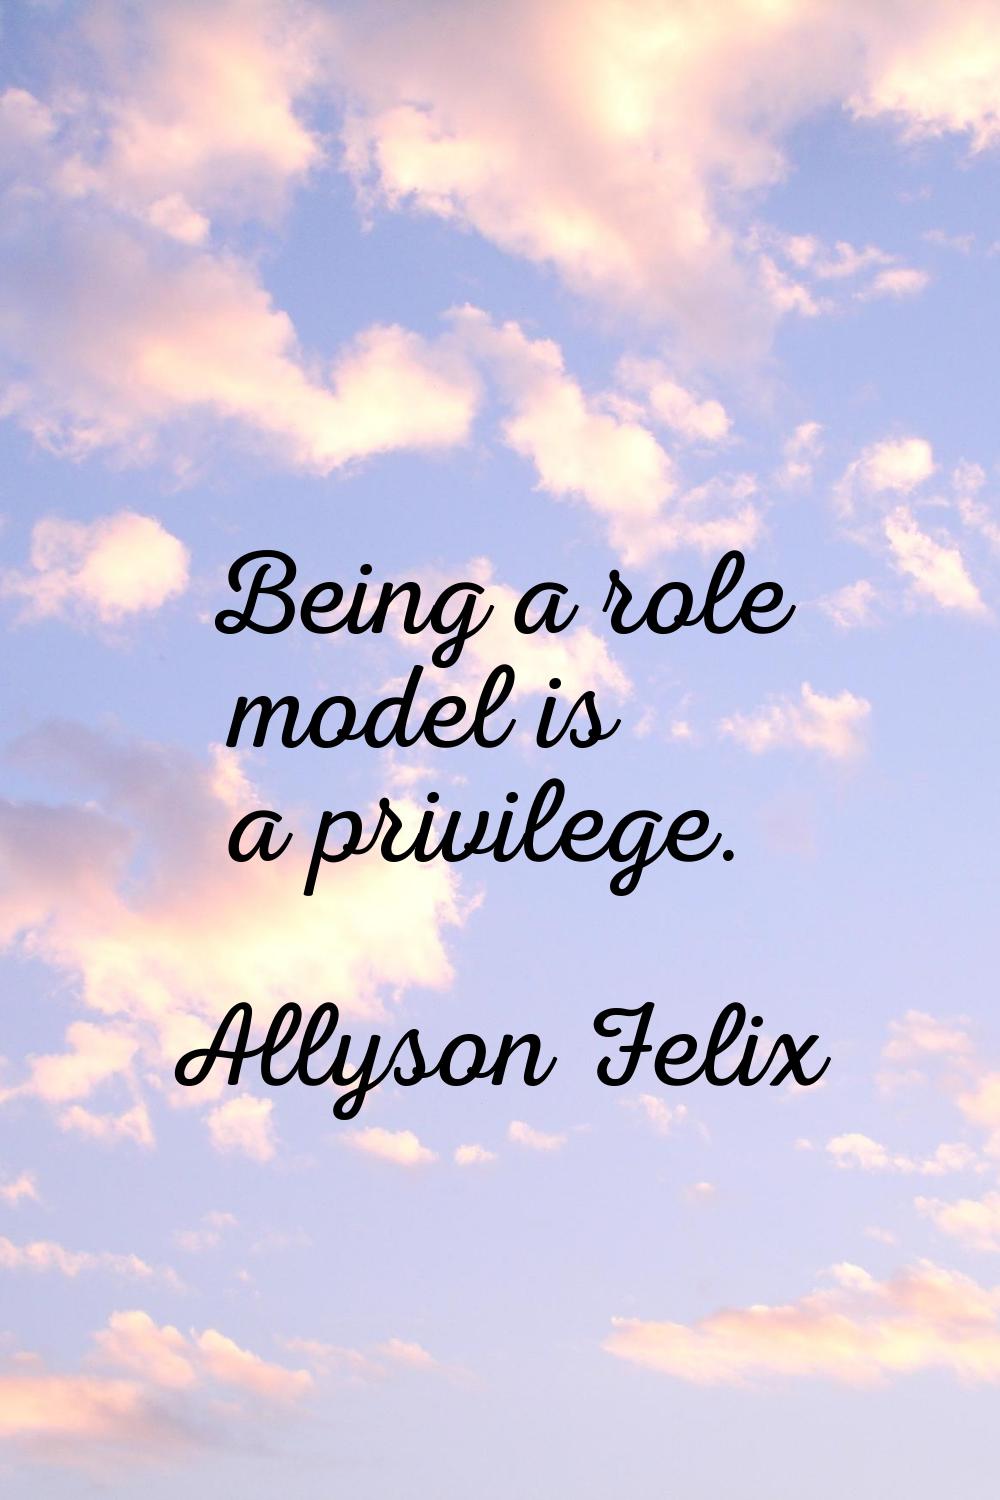 Being a role model is a privilege.